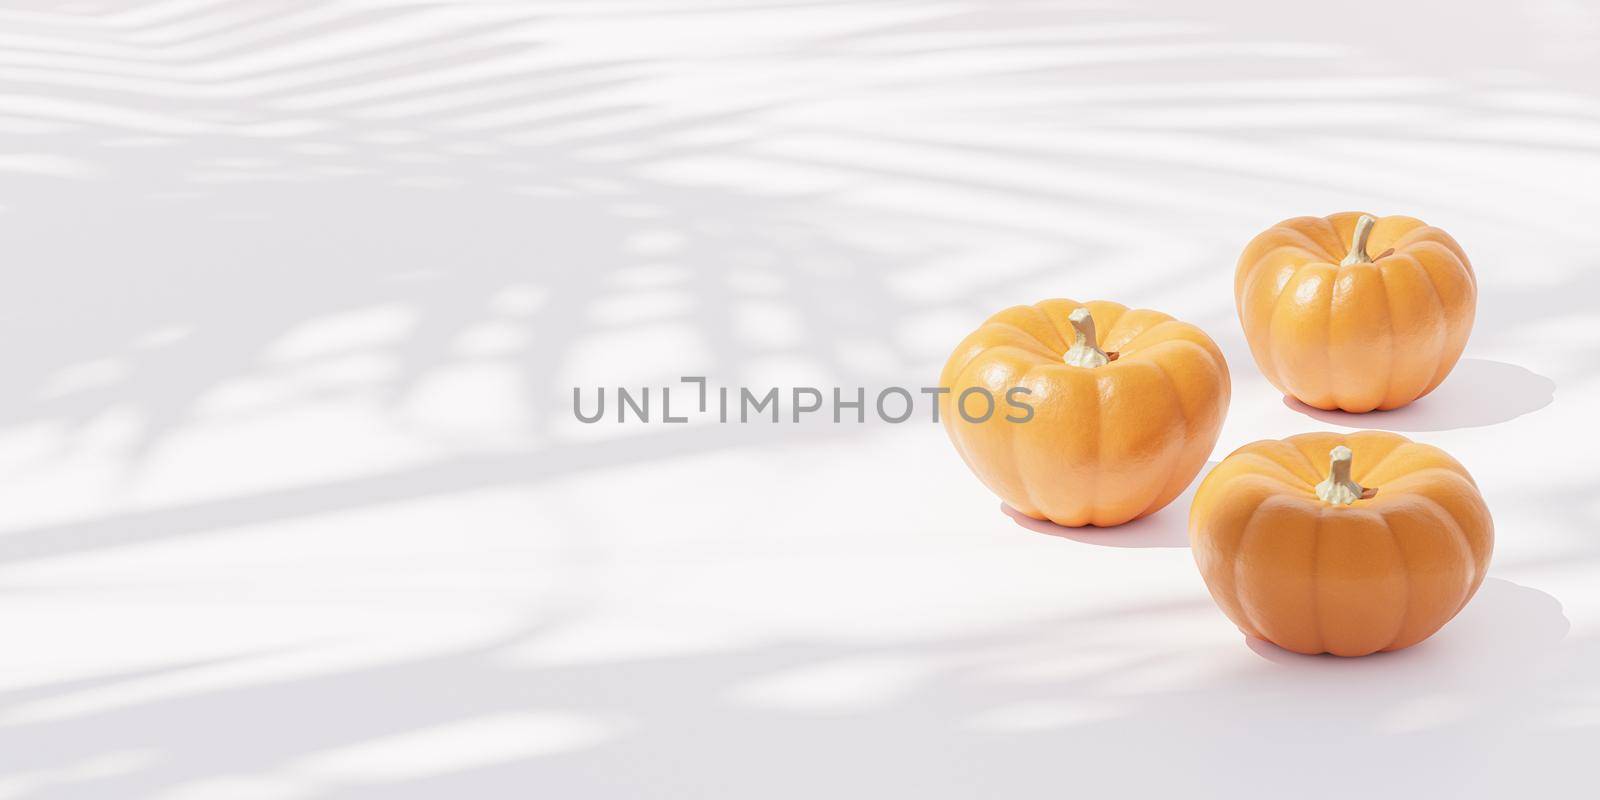 Pumpkins on white background for advertising on autumn holidays or sales, 3d banner render